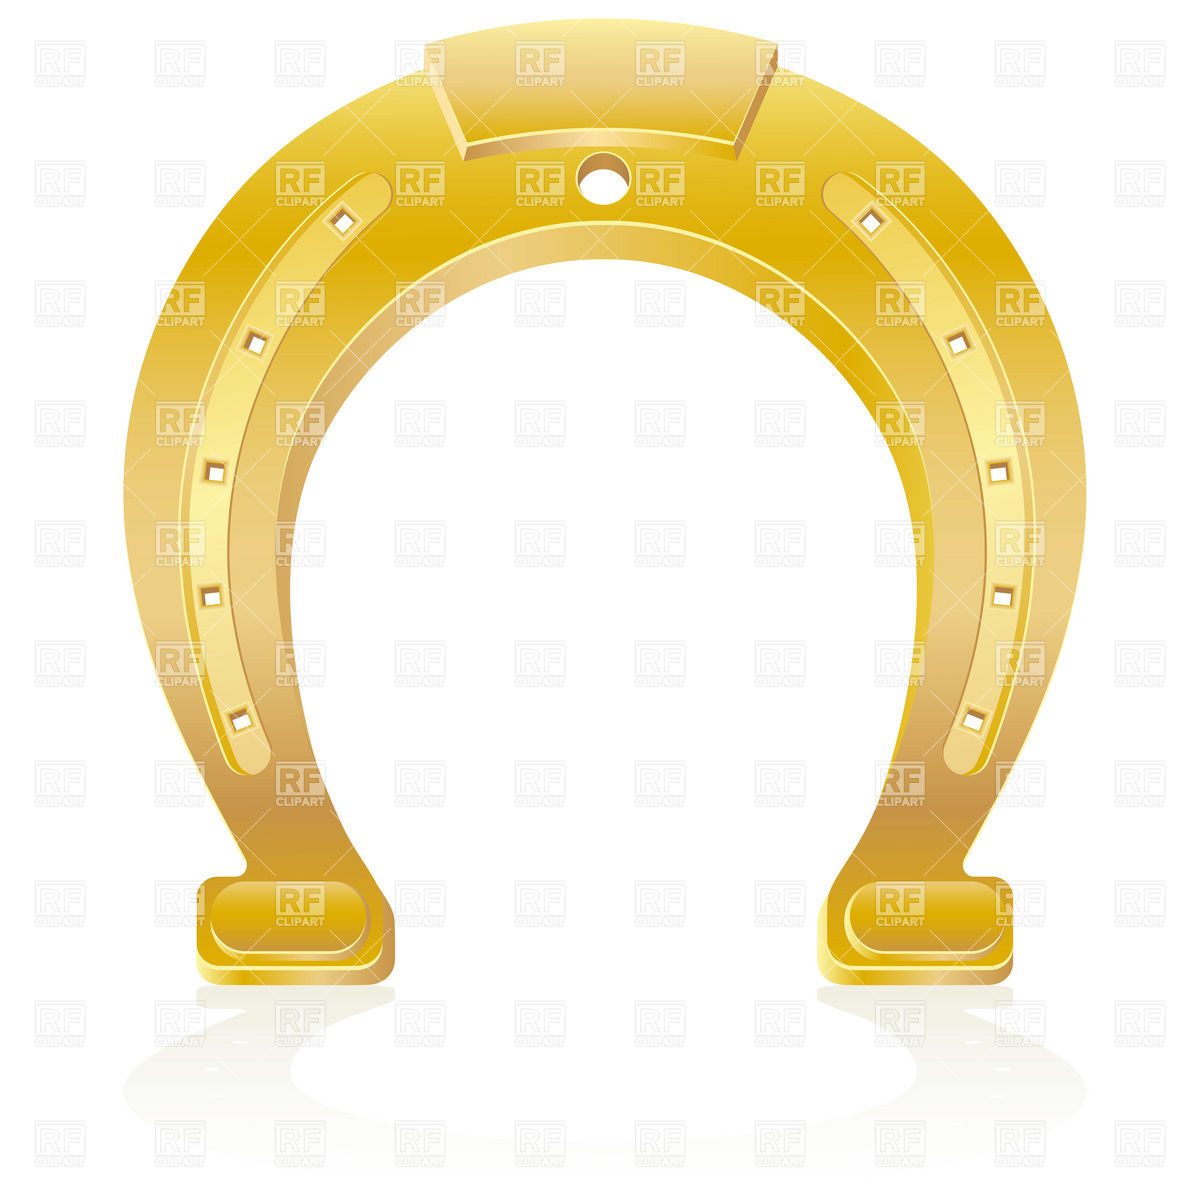 Gold Horseshoe 19425 Objects Download Royalty Free Vector Clipart